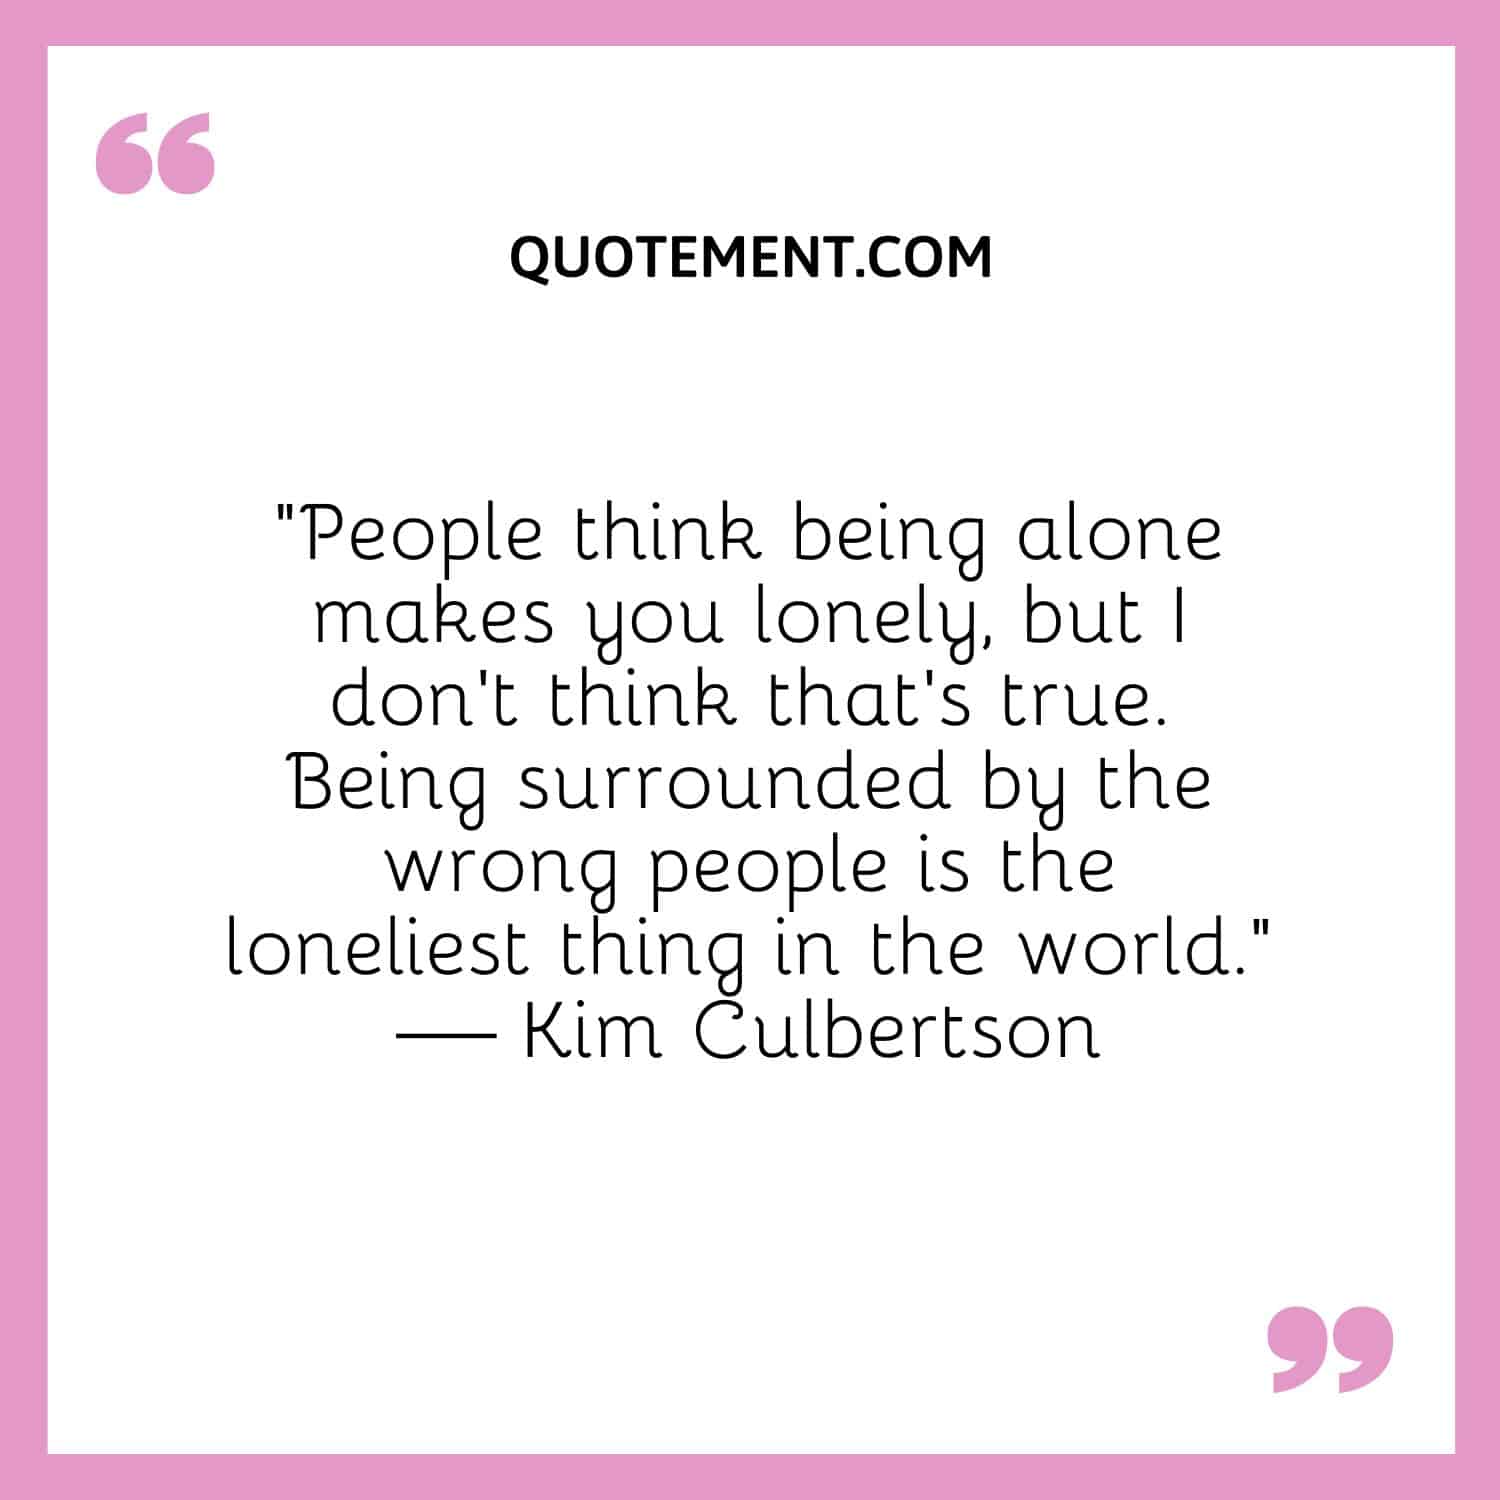 People think being alone makes you lonely, but I don’t think that’s true